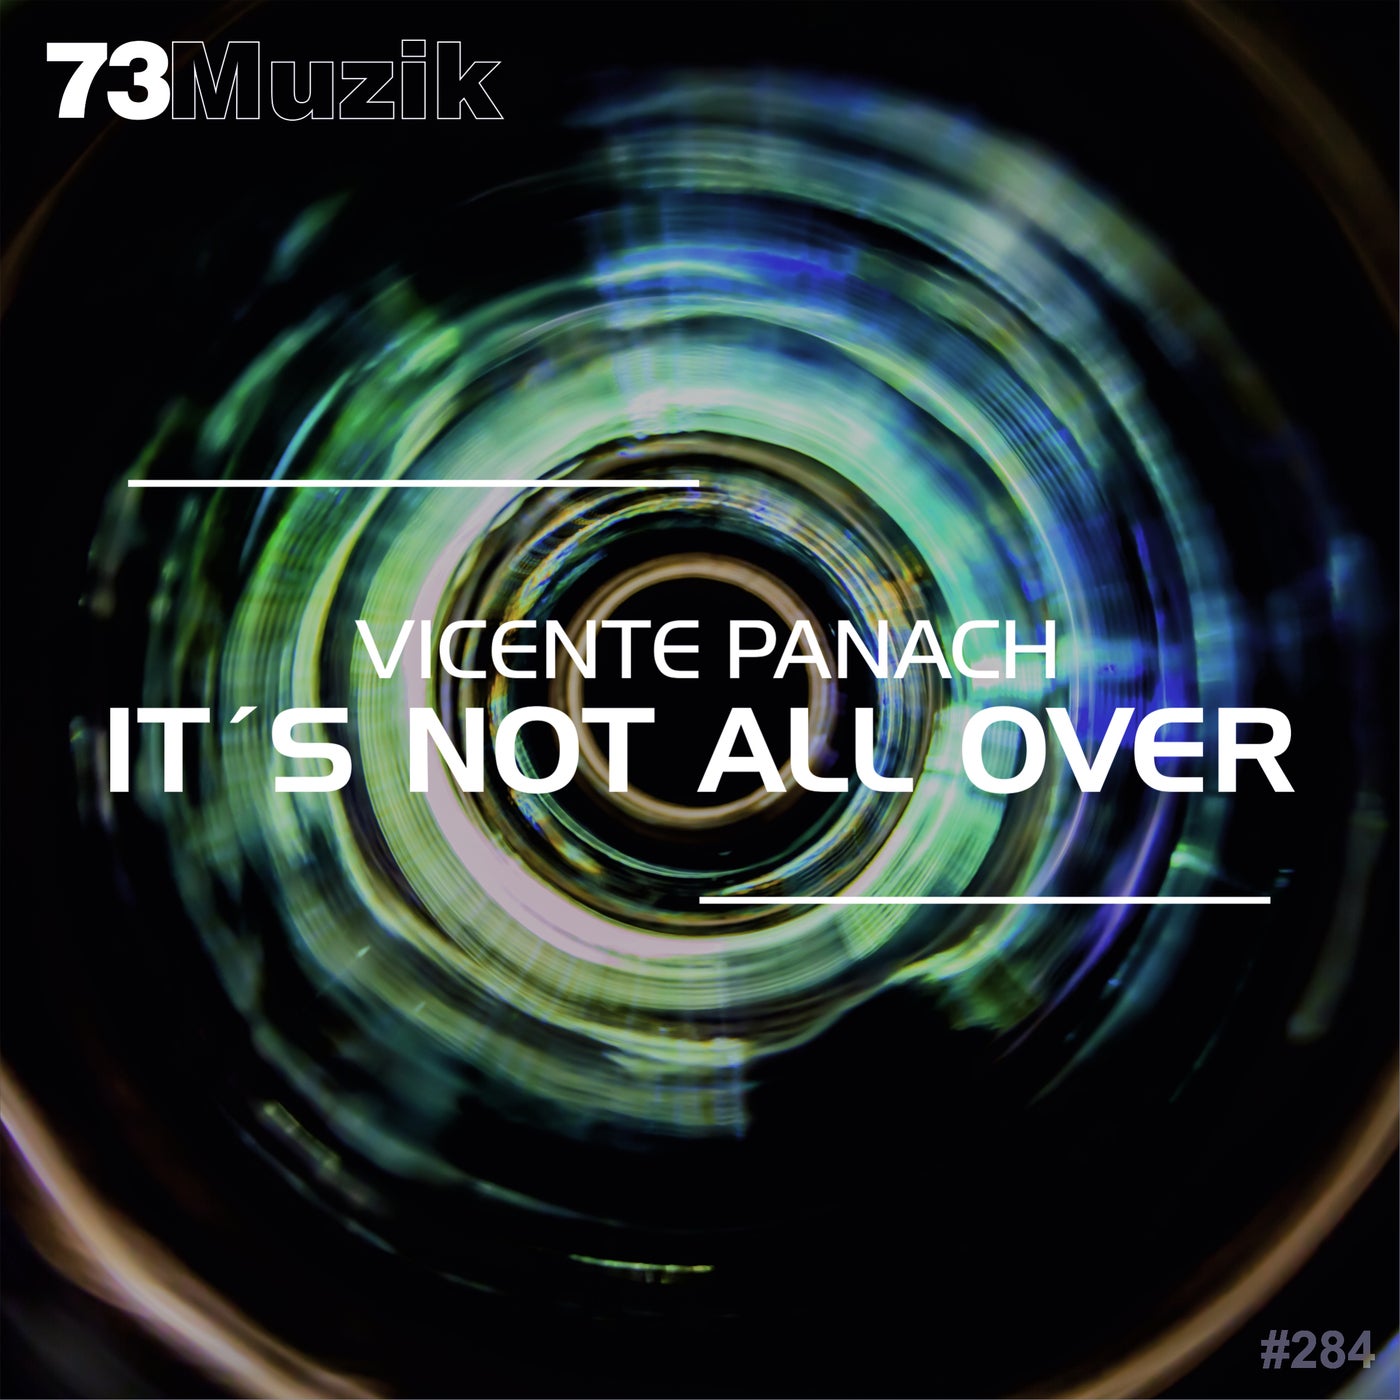 Vicente Panach - It's Not All Over [73M284]